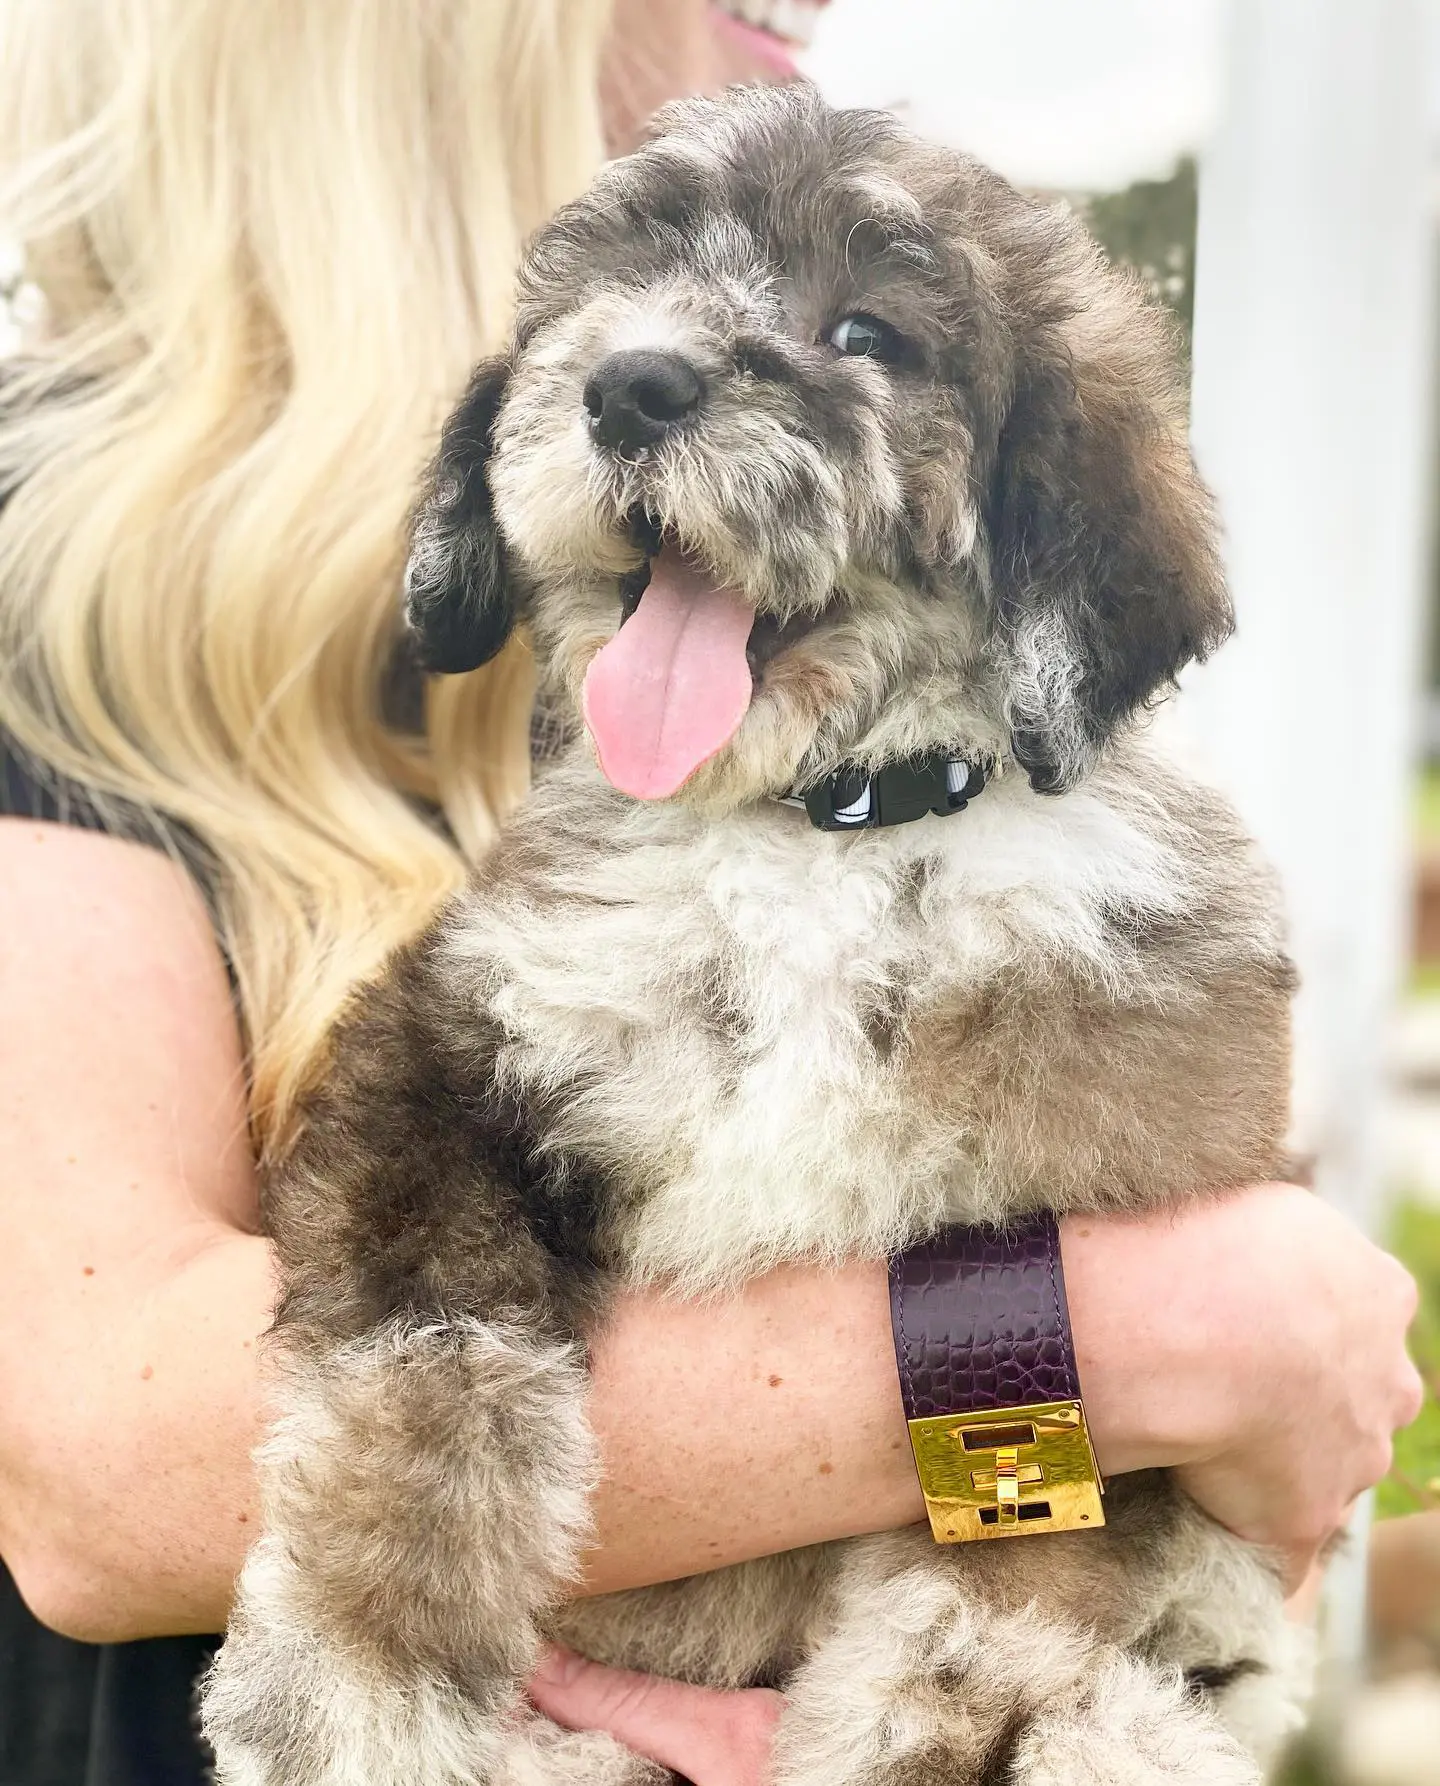 The wookie golden doodle is a majestic creature, worthy of your admiration. With its luxurious, grare fur and friendly disposition, it is sure to win your heart.